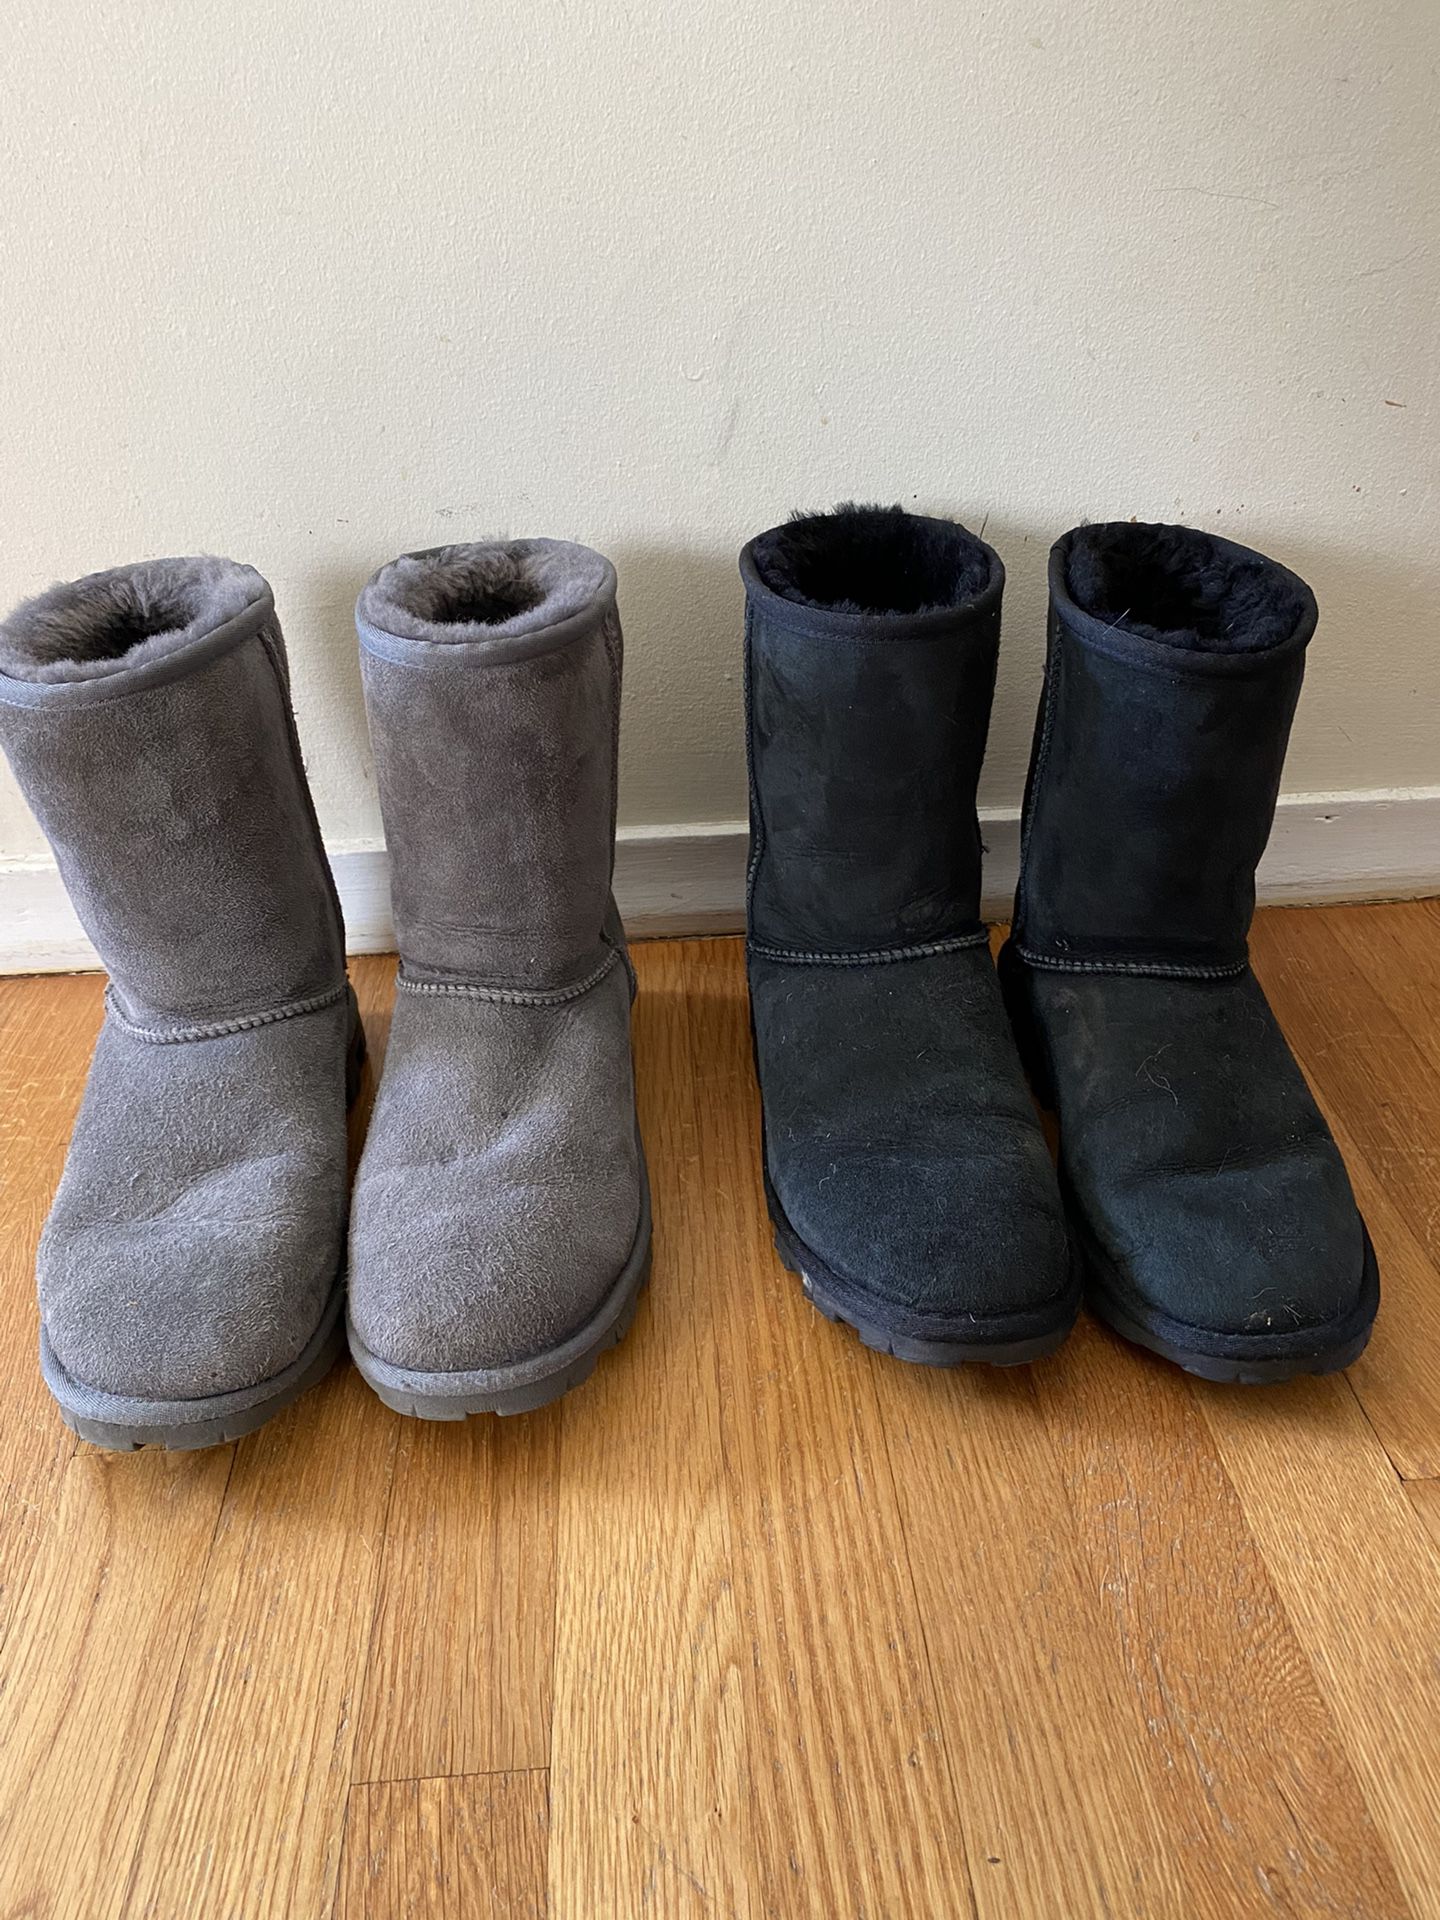 UGG Boots, Two Pairs, Size 9, Womens Boots